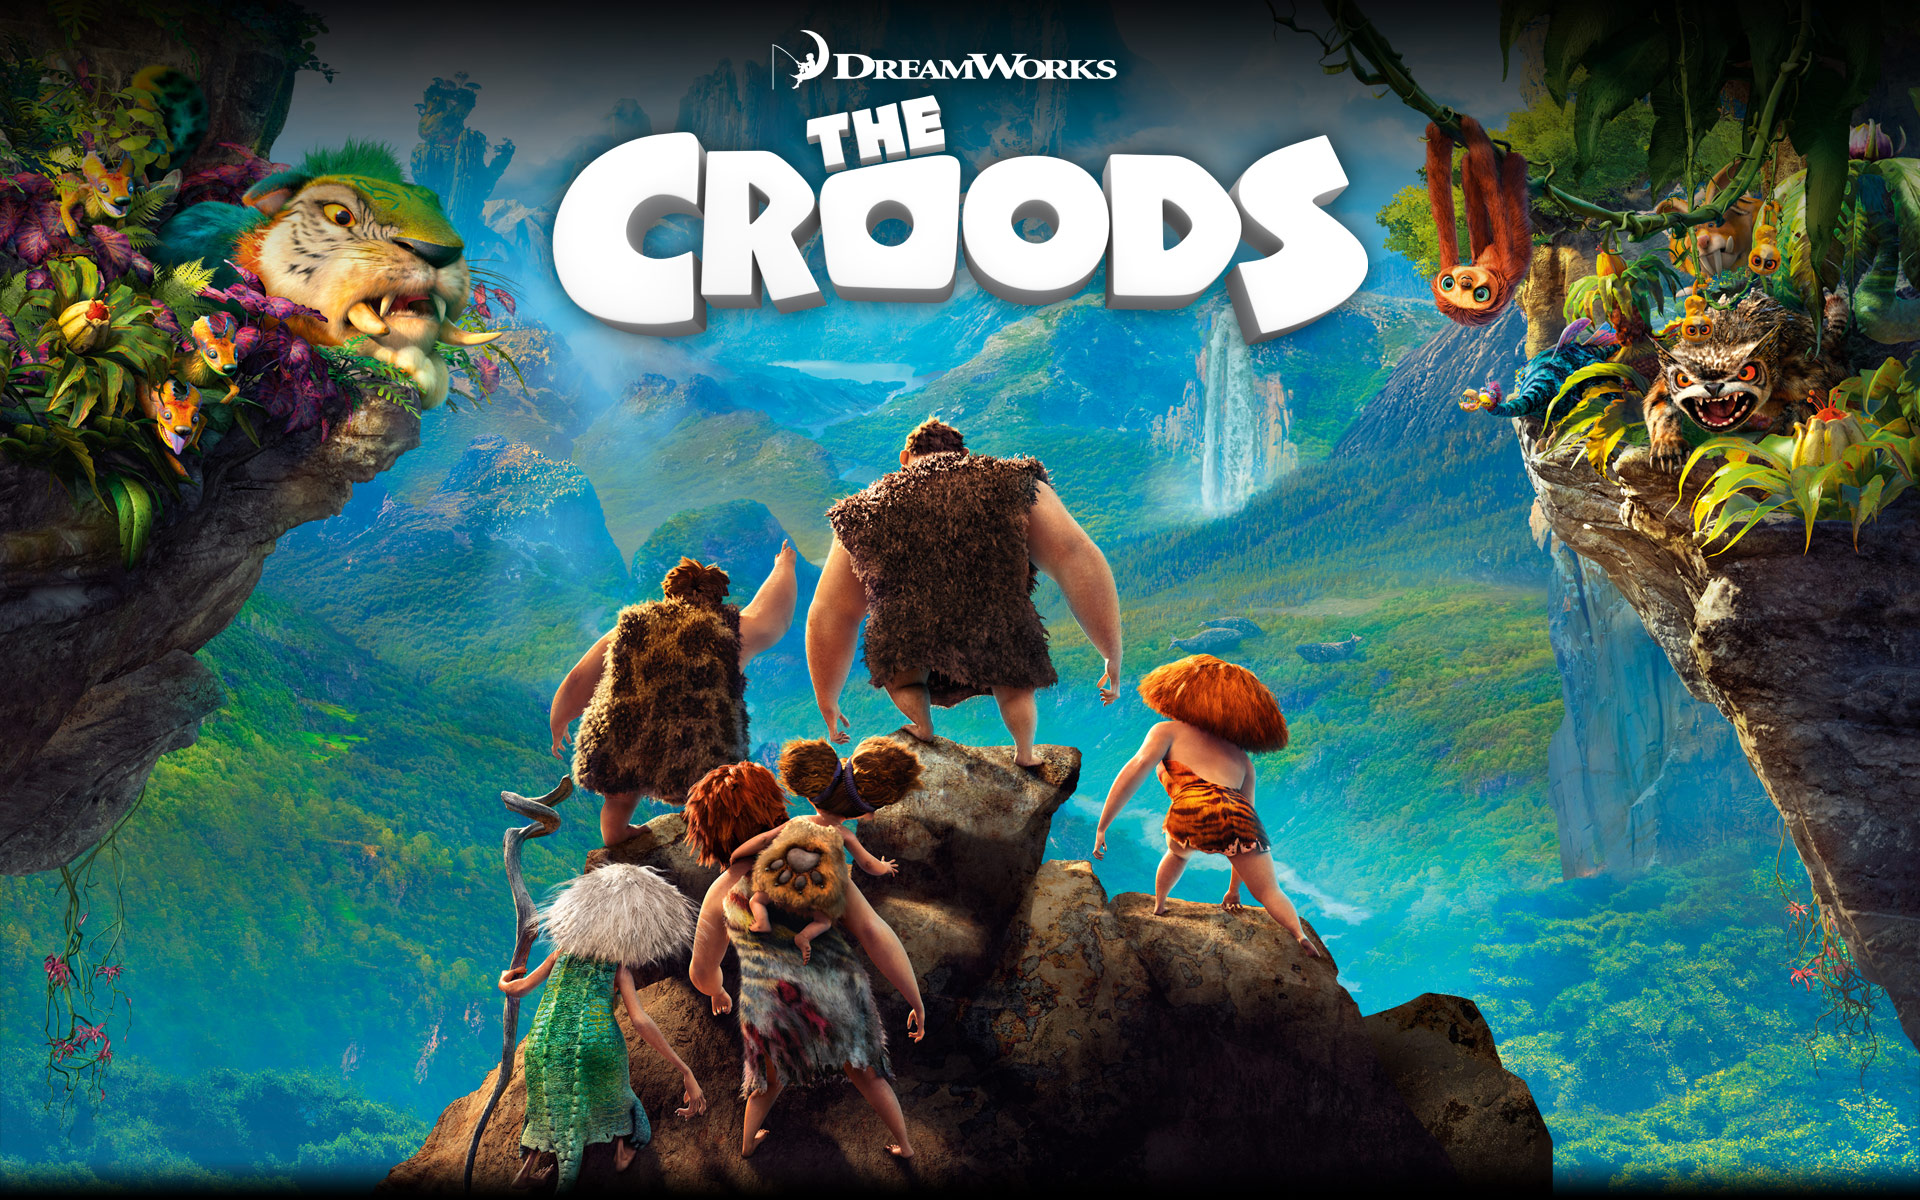 High Resolution Wallpaper | The Croods 1920x1200 px